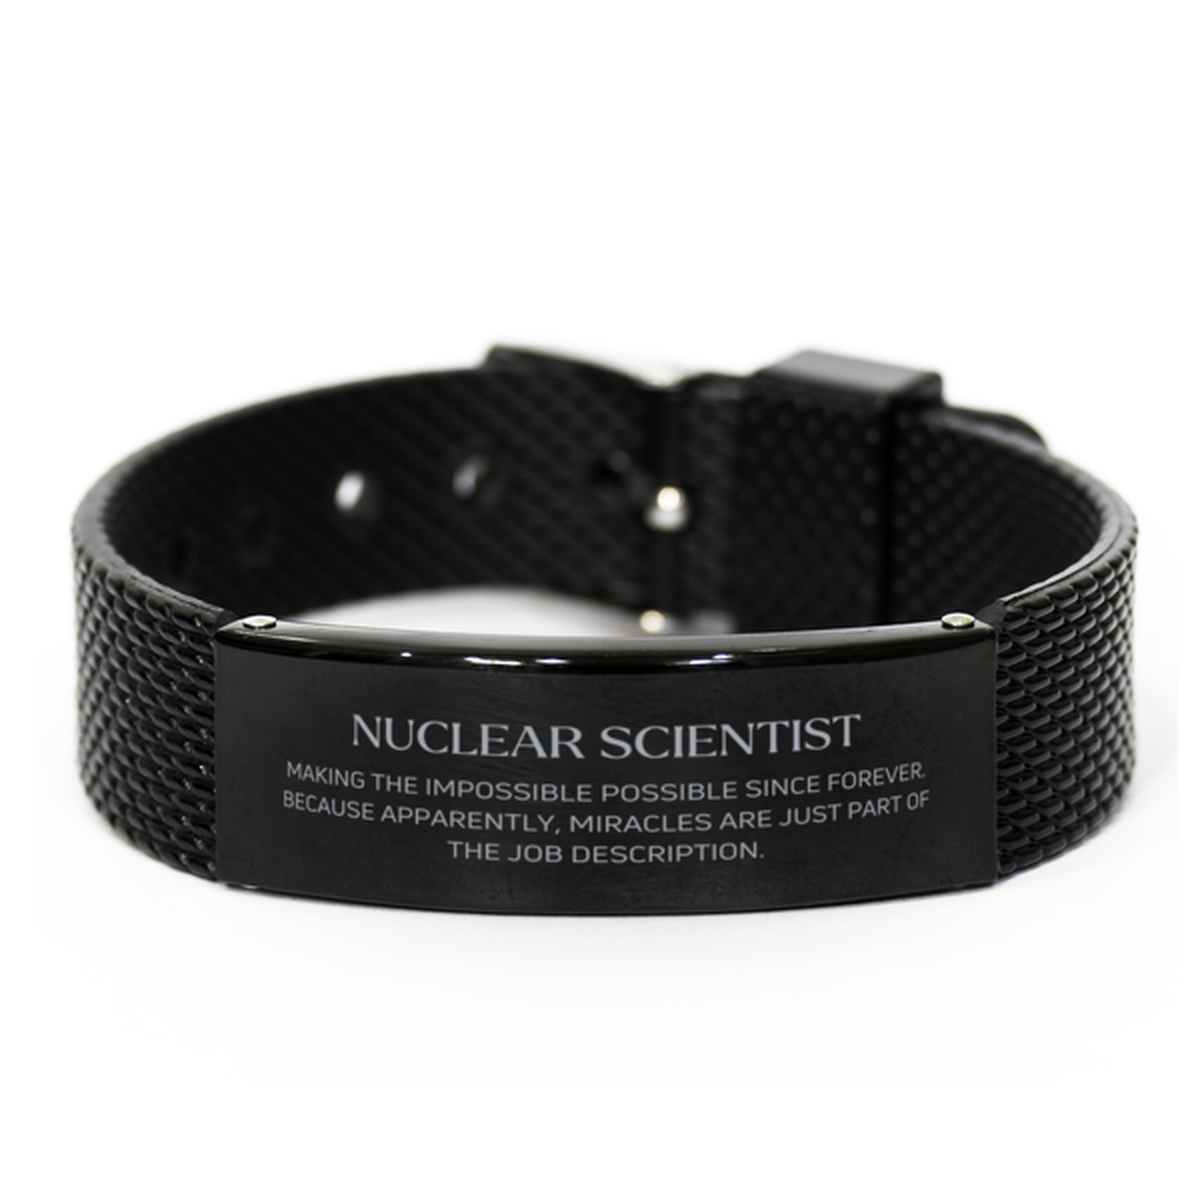 Funny Nuclear Scientist Gifts, Miracles are just part of the job description, Inspirational Birthday Black Shark Mesh Bracelet For Nuclear Scientist, Men, Women, Coworkers, Friends, Boss